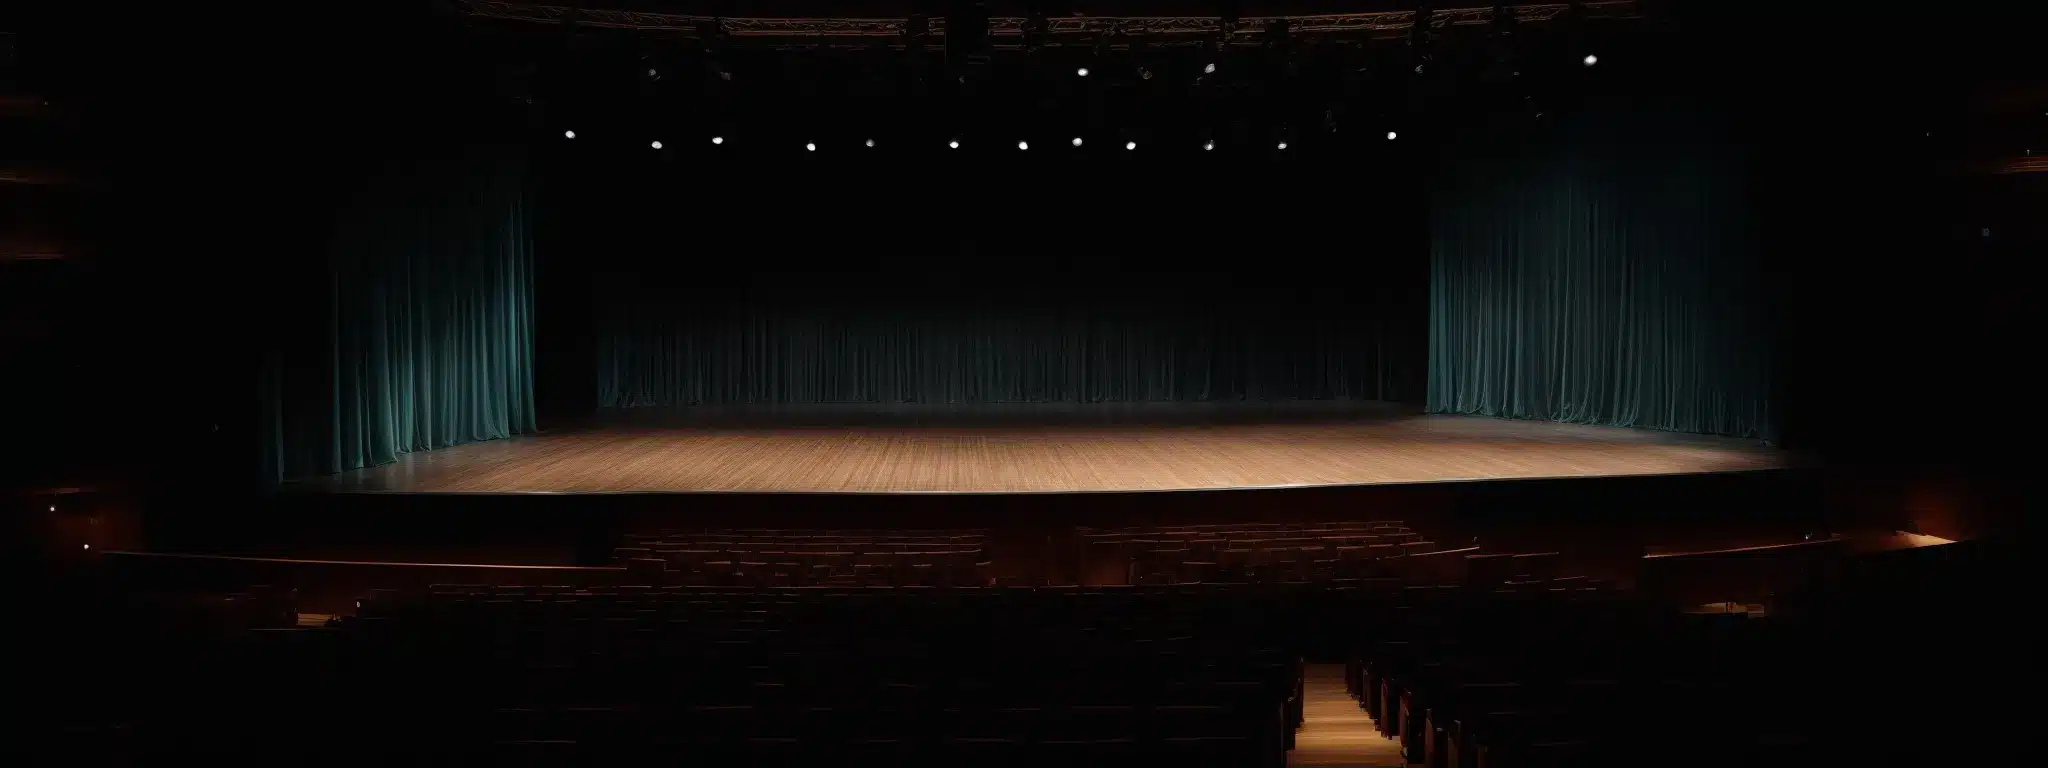 A Grandiose Stage With A Spotlight Illuminating An Empty Space Poised For A Performance, Indicative Of Potential And Anticipation For Innovation.